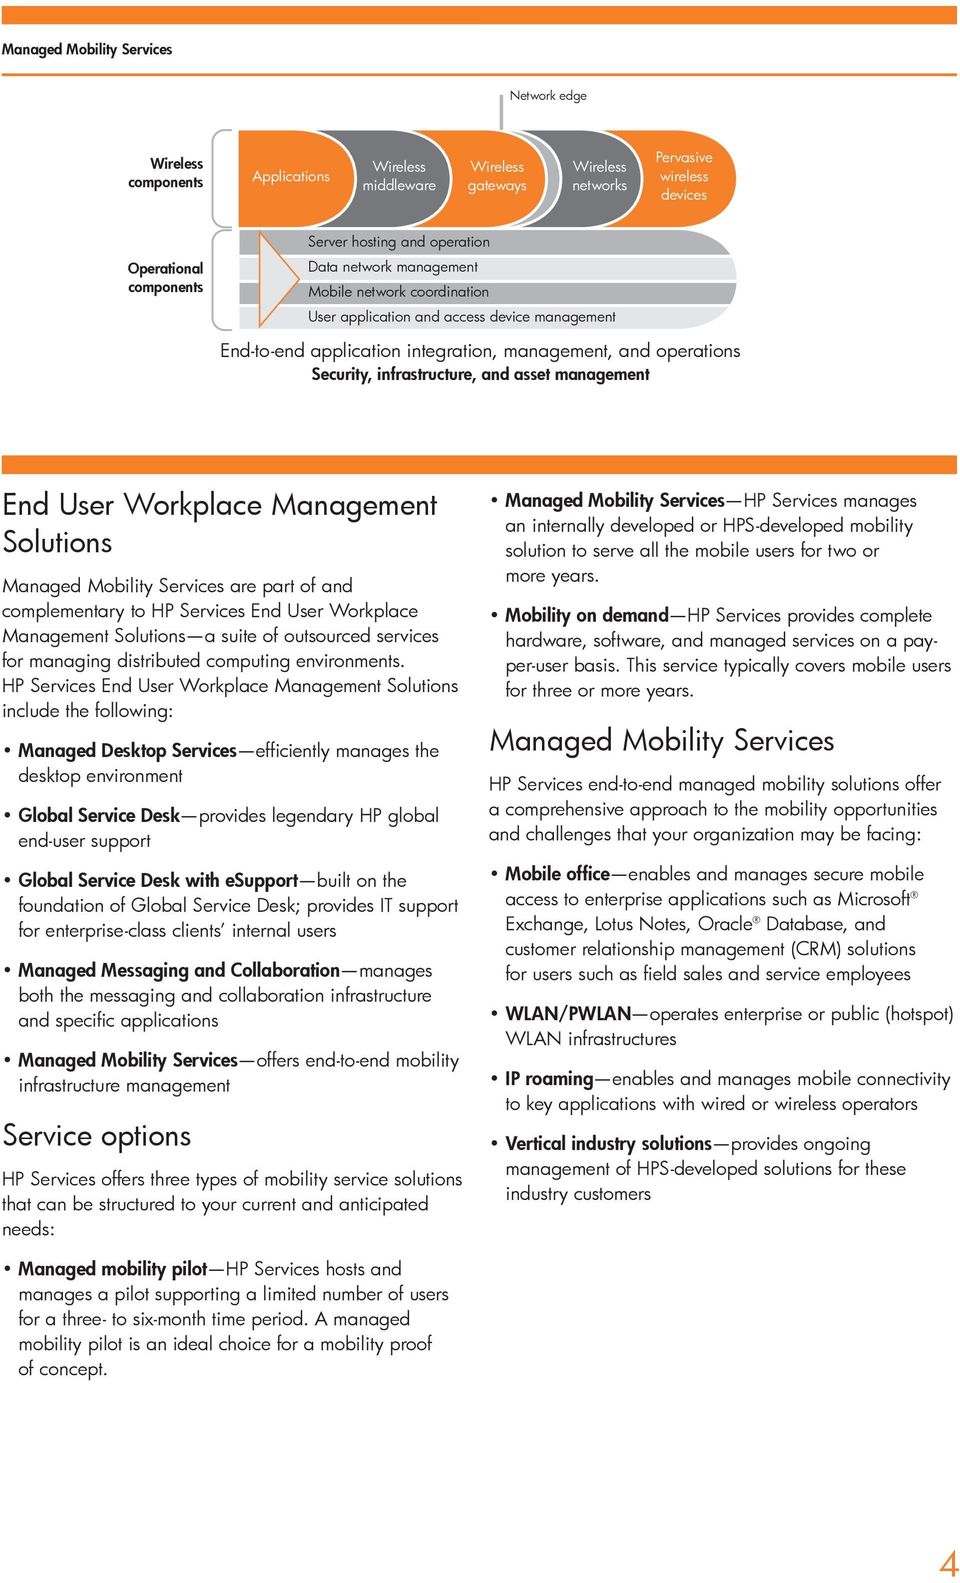 Workplace Management Solutions Managed Mobility Services are part of and complementary to HP Services End User Workplace Management Solutions a suite of outsourced services for managing distributed